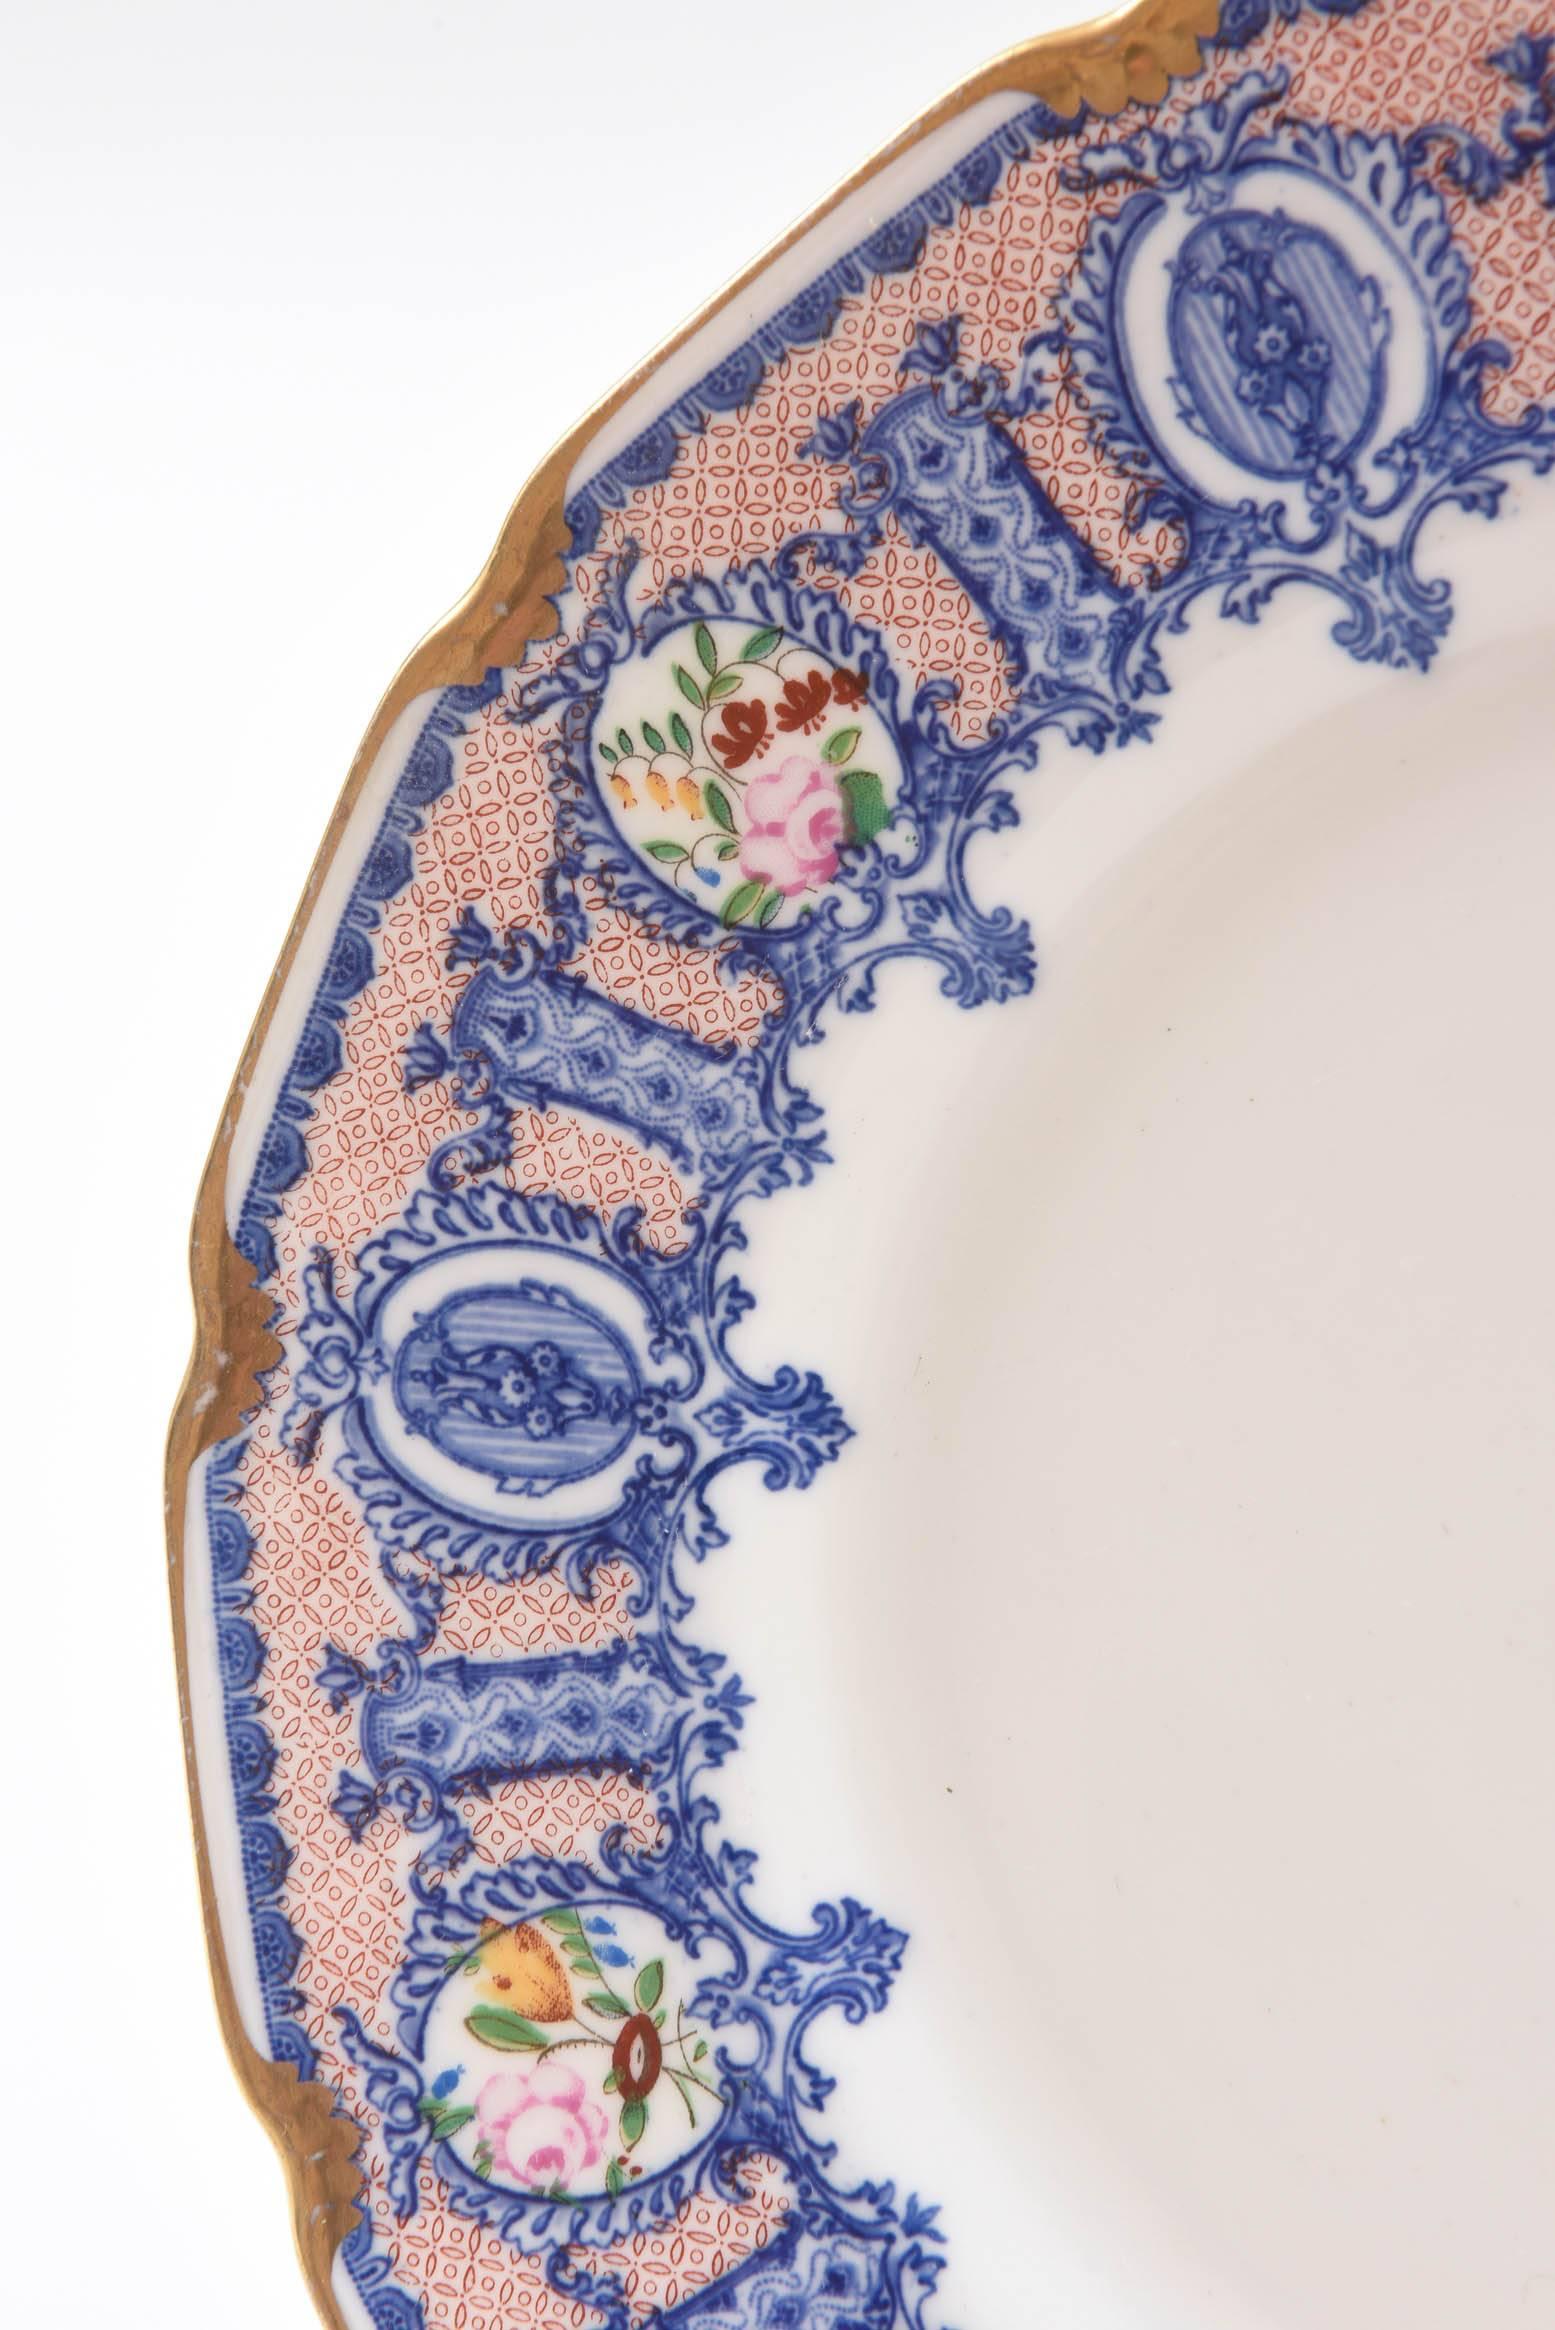 Hand-Crafted 12 Antique Dessert Plates, Blue with Roses, Custom Ordered Marshall Fields